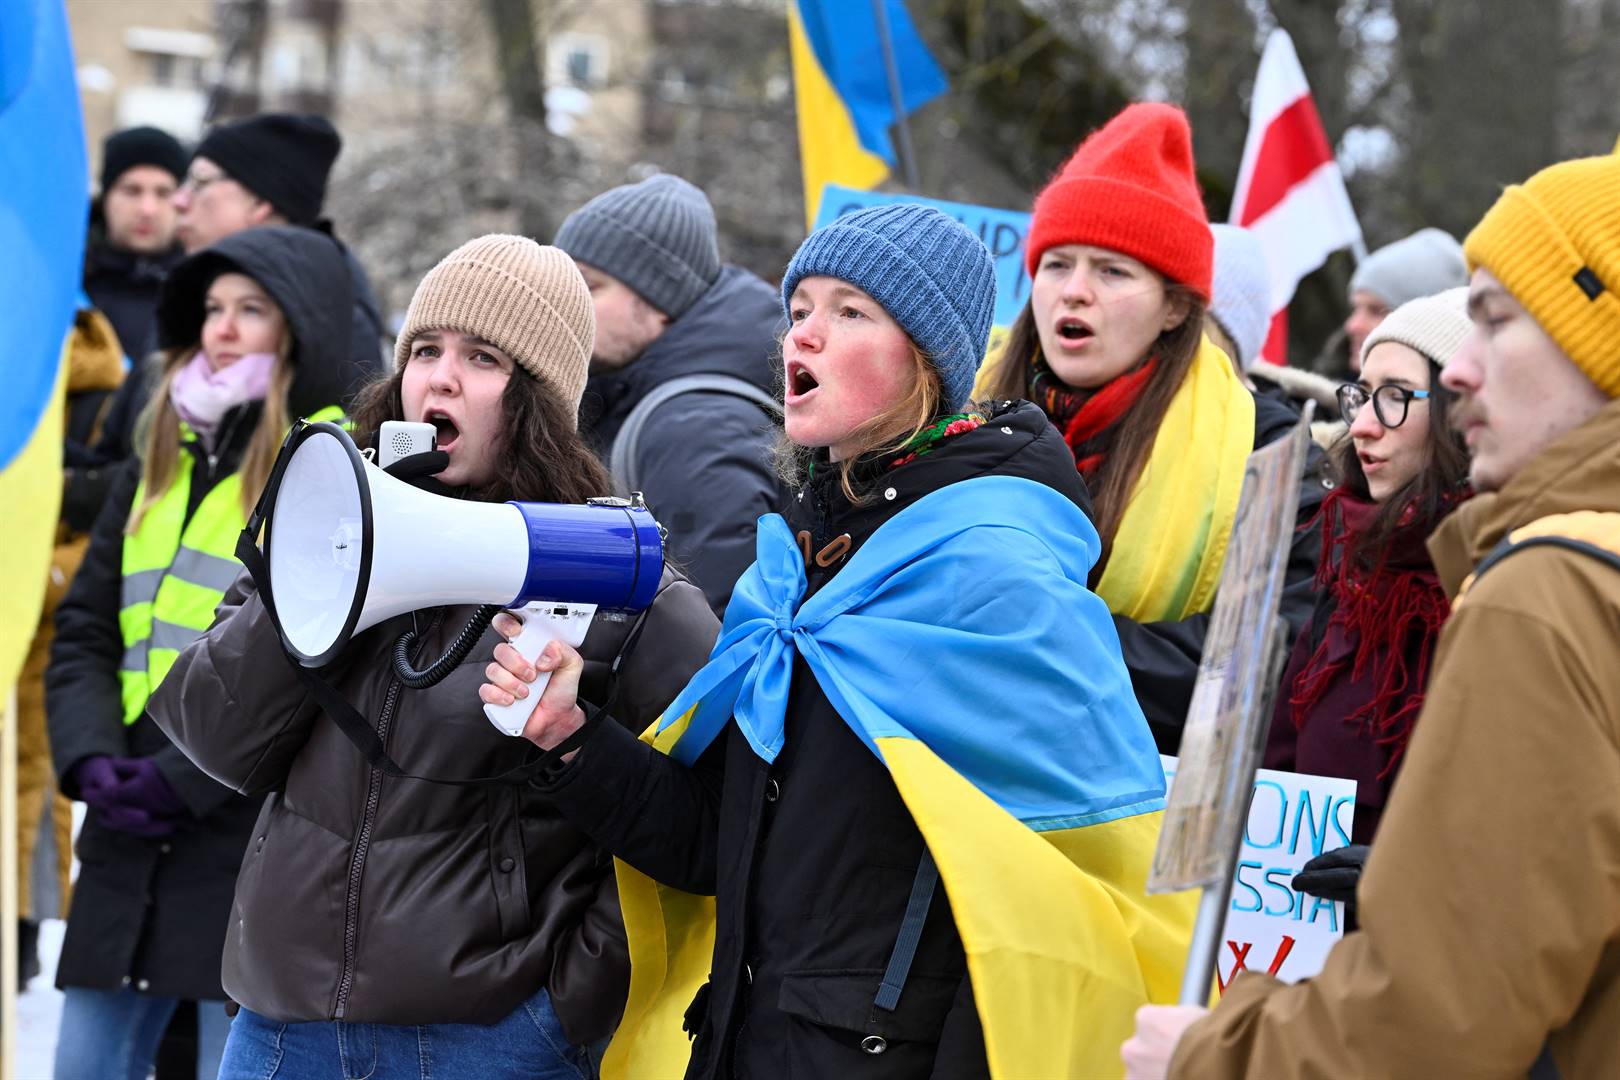 Protesters gather during a rally against Russia's invasion of Ukraine, in front of the Russian Embassy in Stockholm, Sweden on February 24.Photo: Claudio Bresciani/TT News Agency/via Reuters